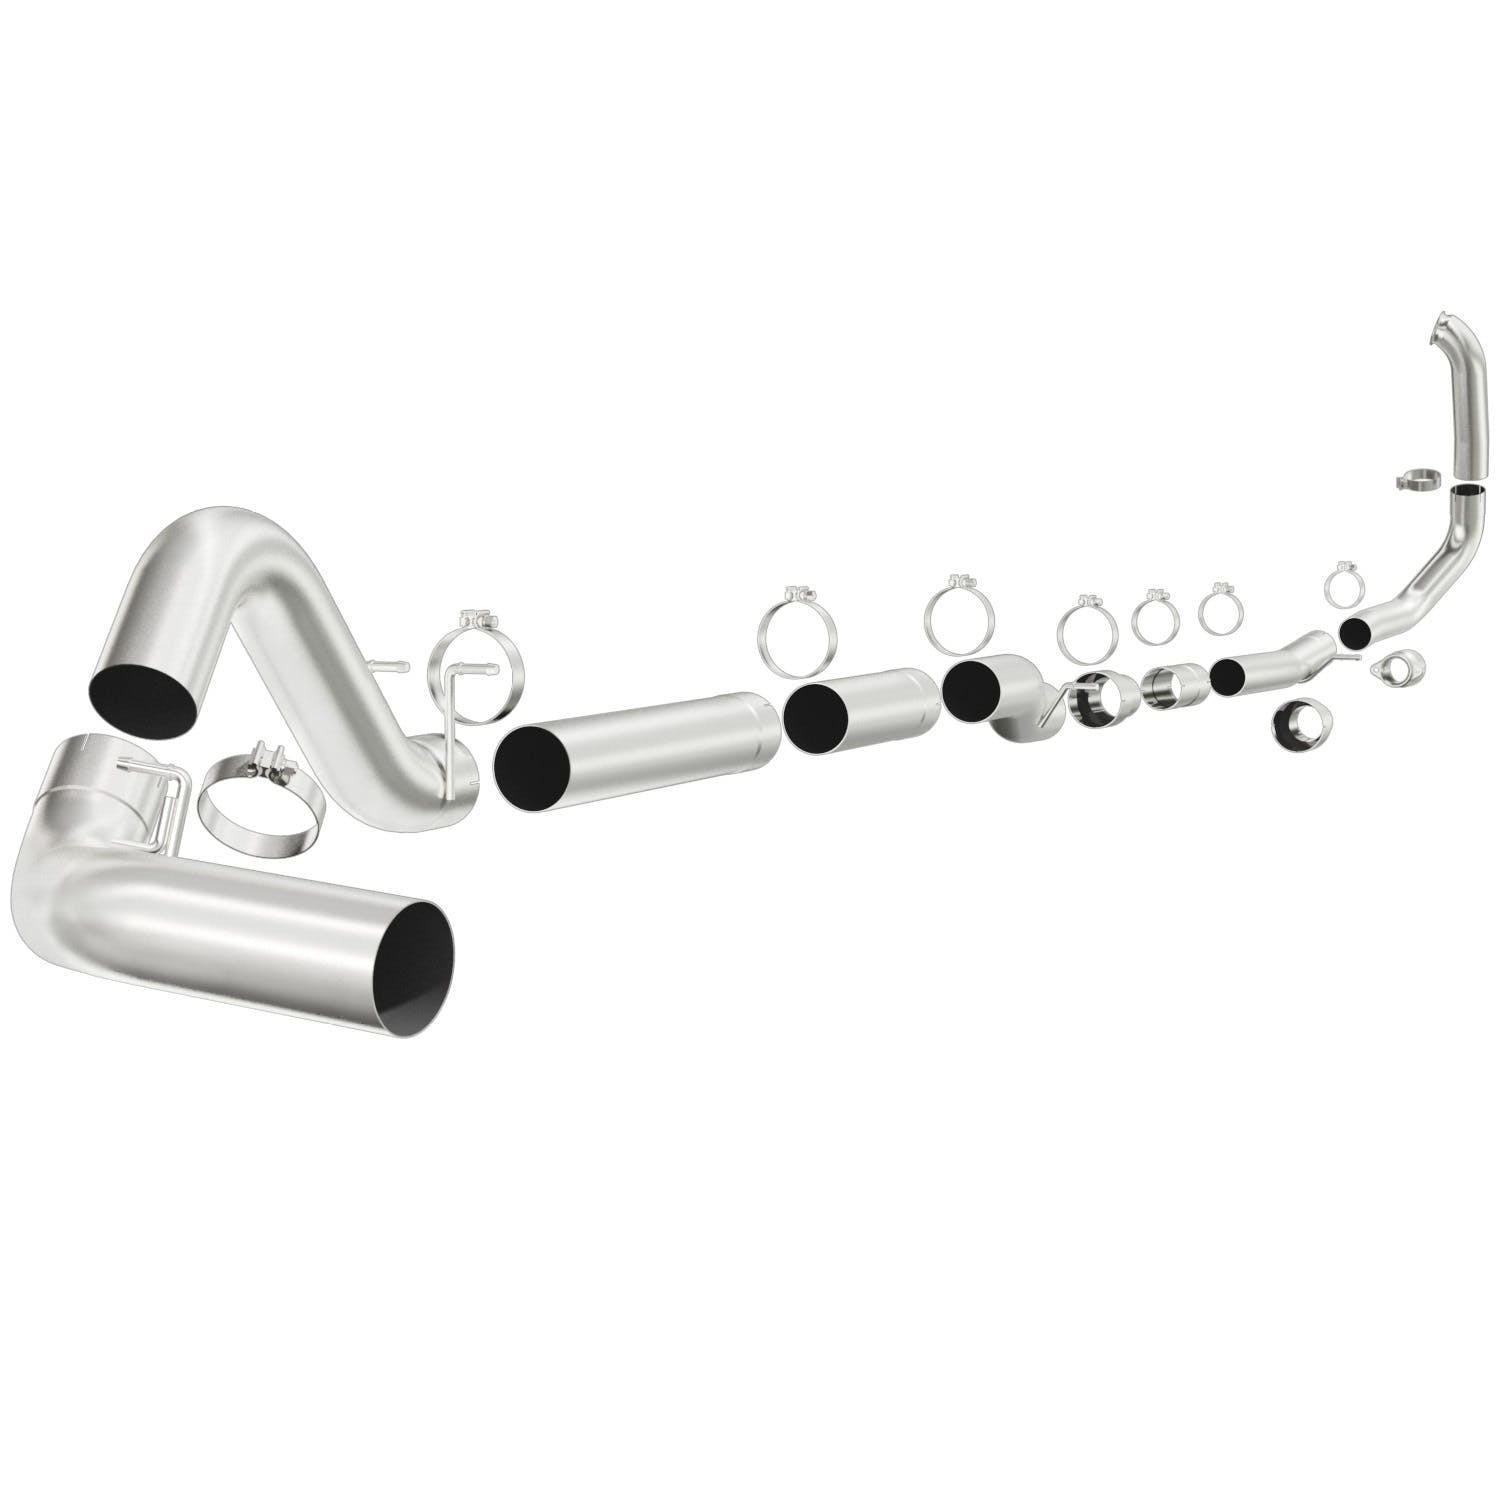 MagnaFlow Exhaust Products 18987 SYS TB 99-03 Ford Diesel 7.3L